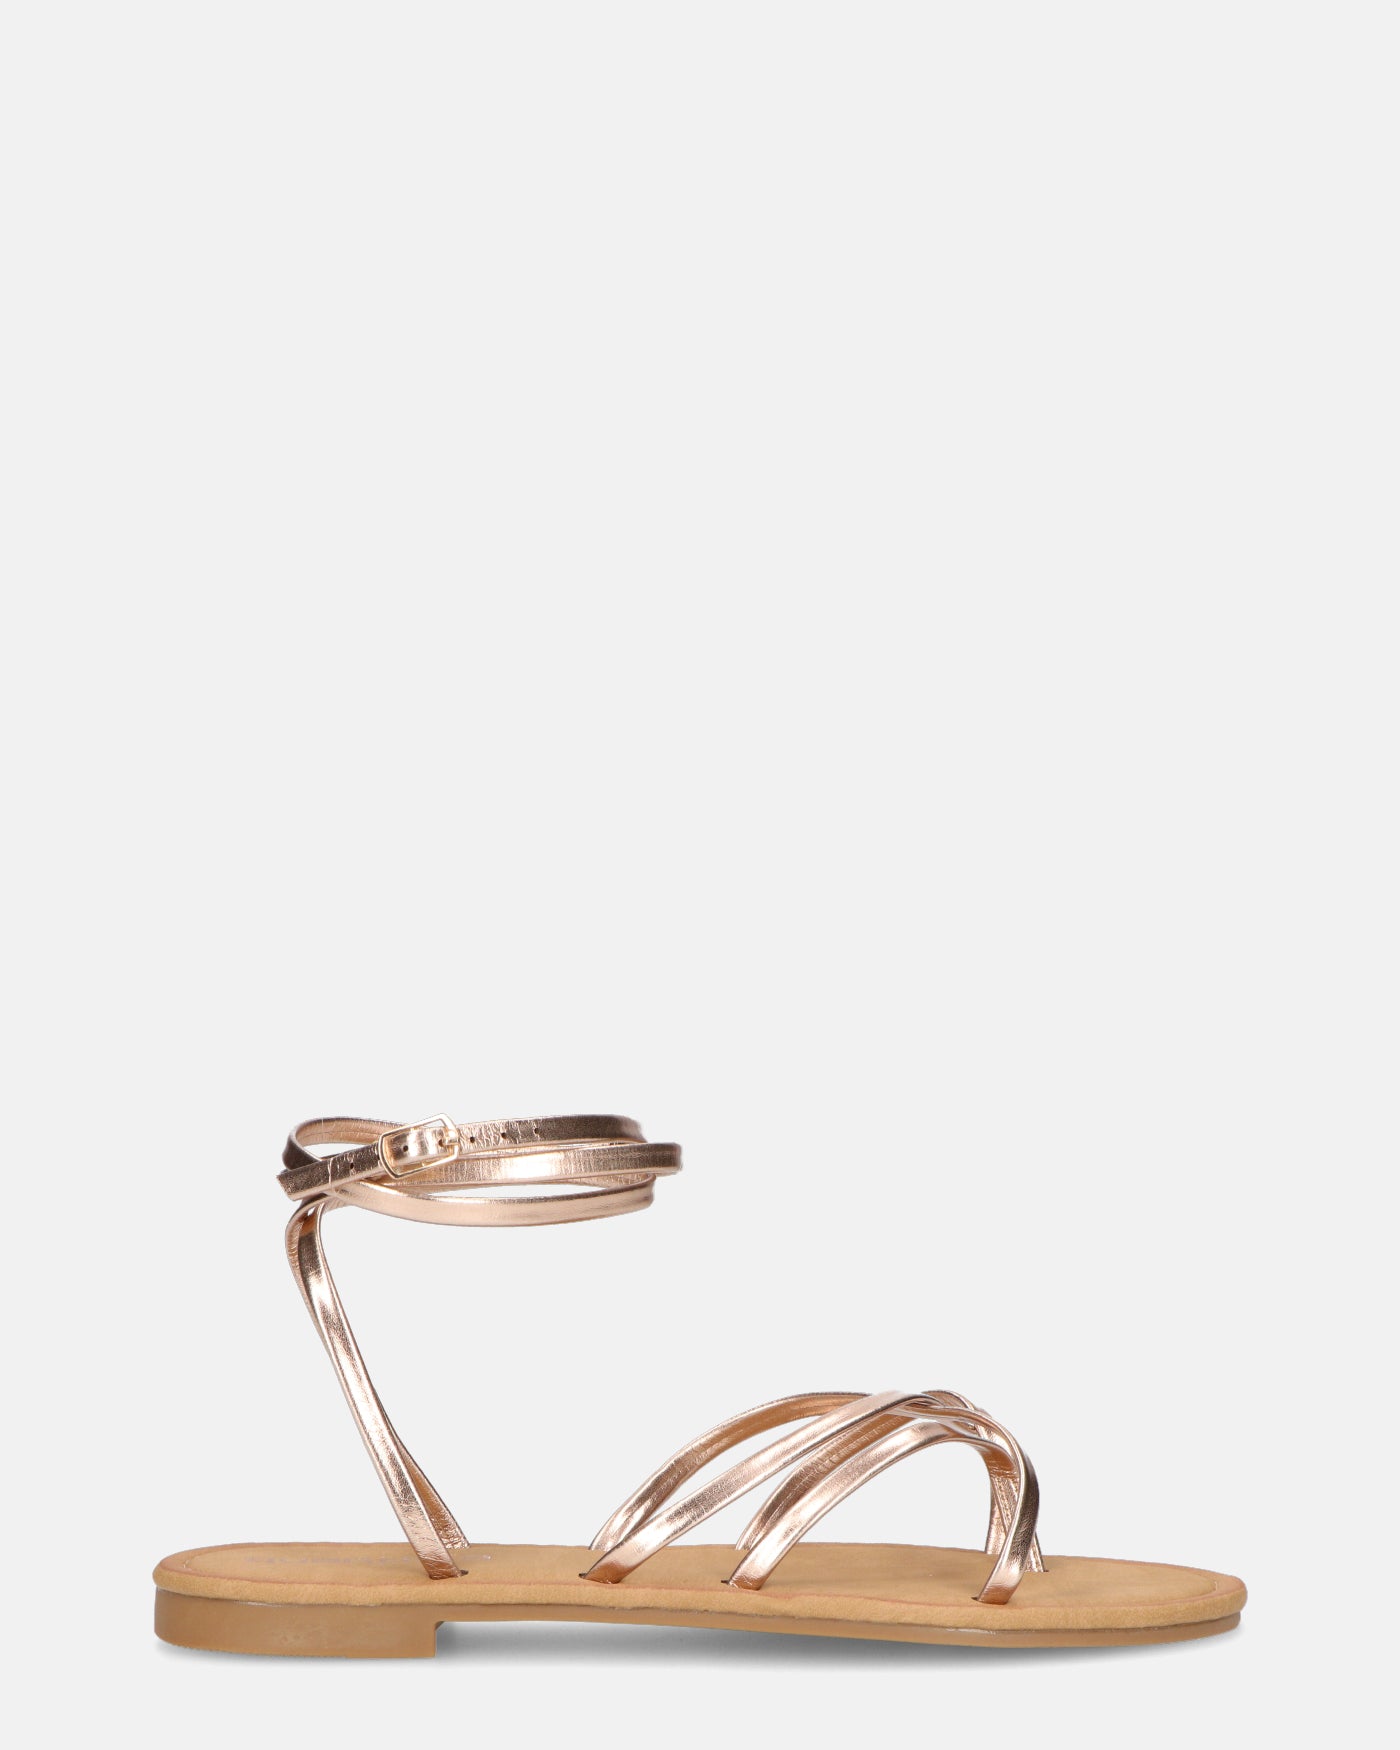 NINA - flat sandals with bronze colored strap and bands